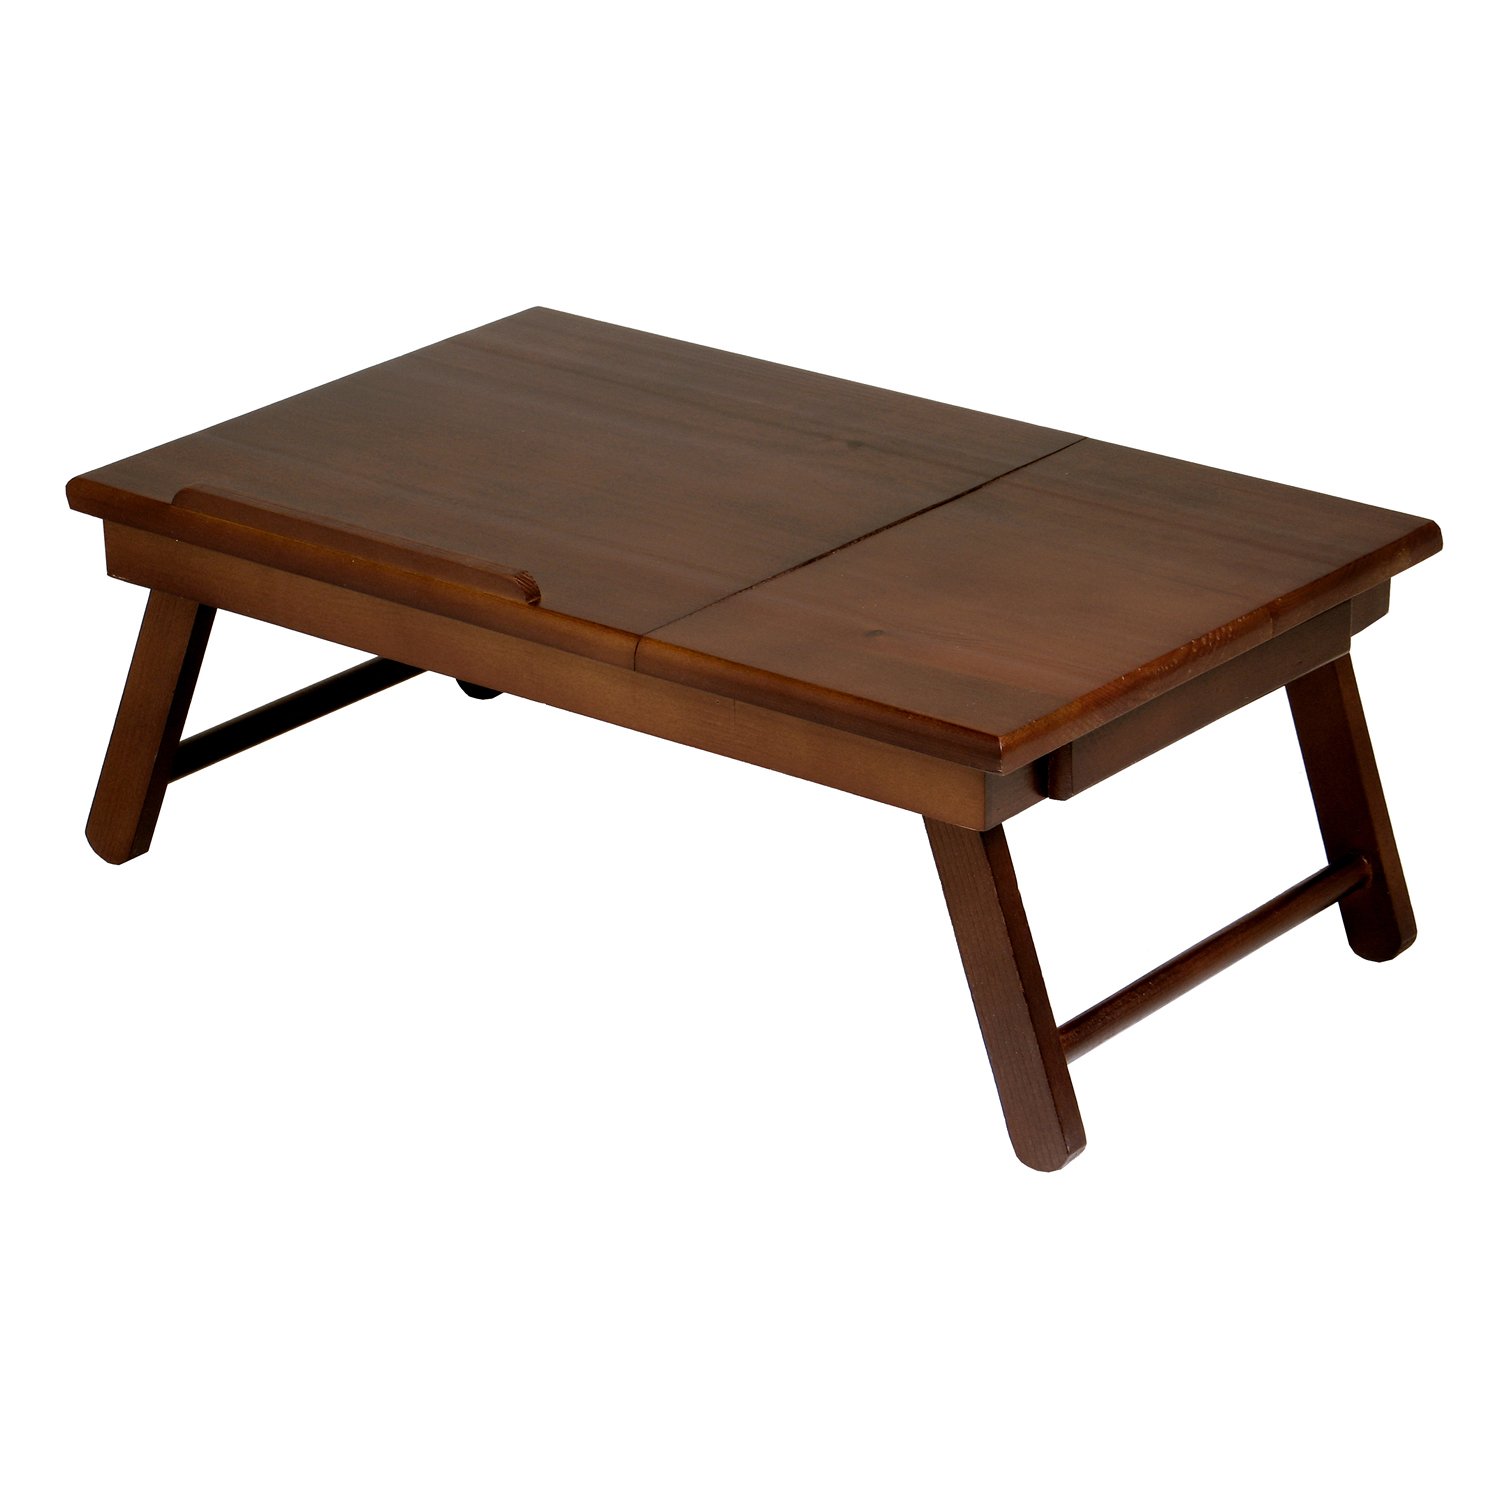 Winsome Trading, Inc. Winsome Wood 94623 Alden Lap Desk Tray Table